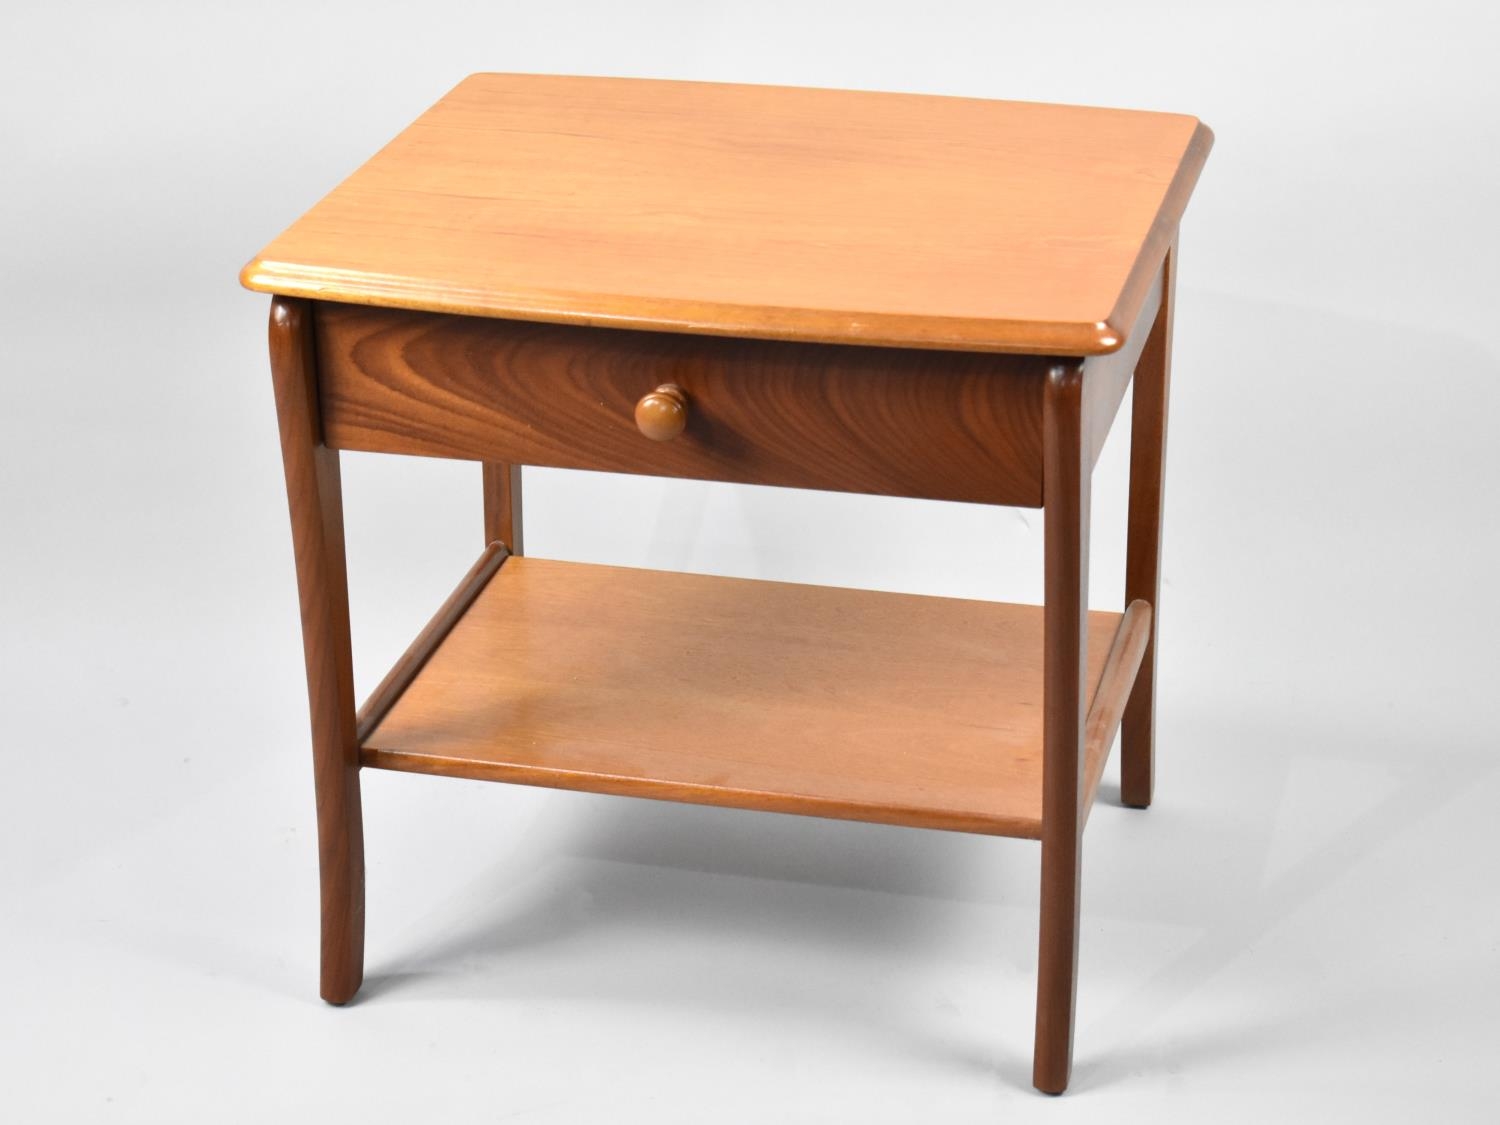 A Modern Bedside Table with Single Drawer, 52cms Wide